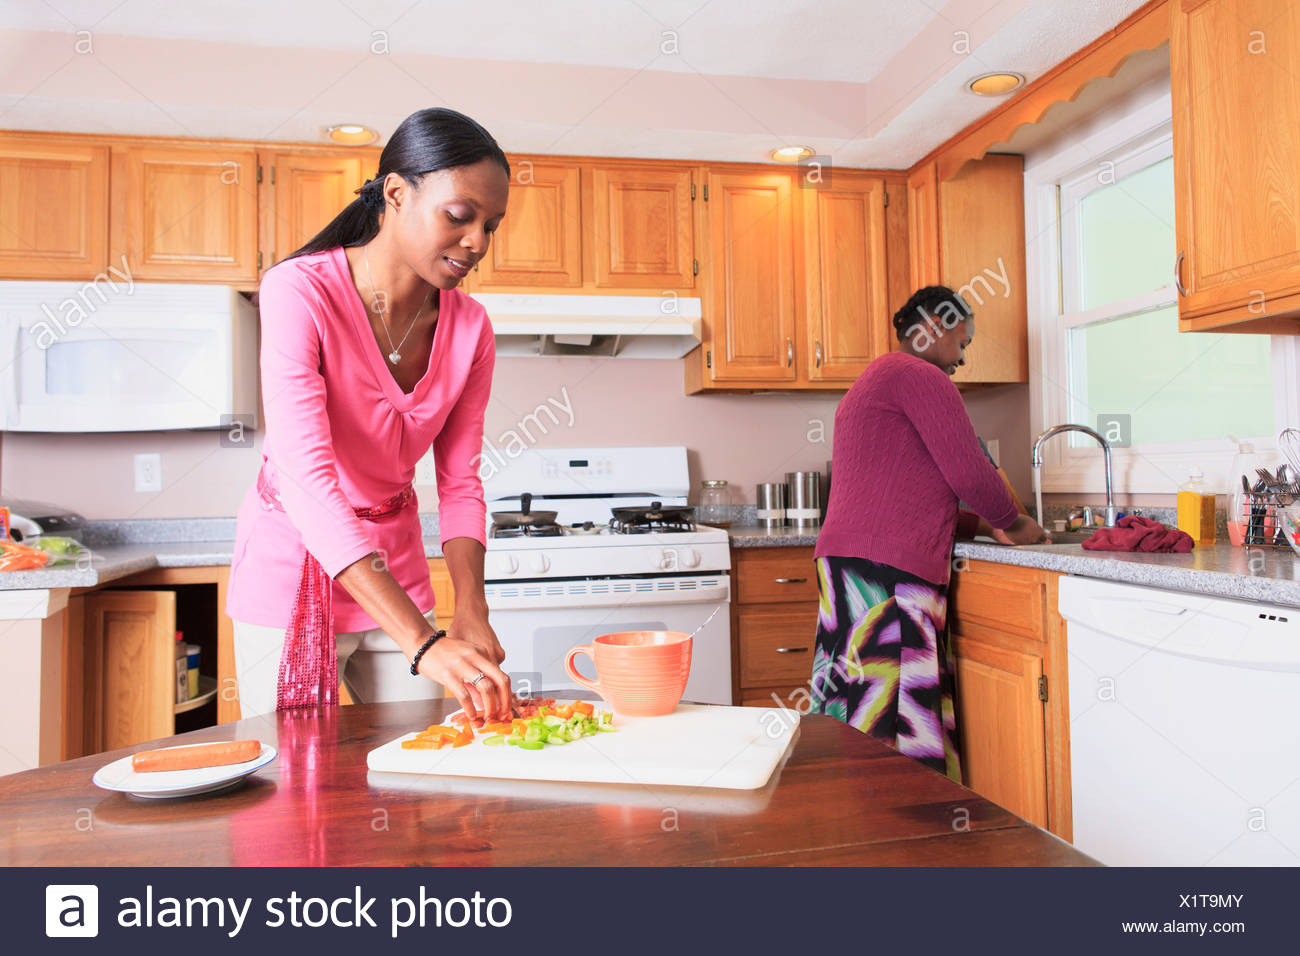 Two Sisters Working In The Kitchen One With Learning Disability Stock Photo Alamy